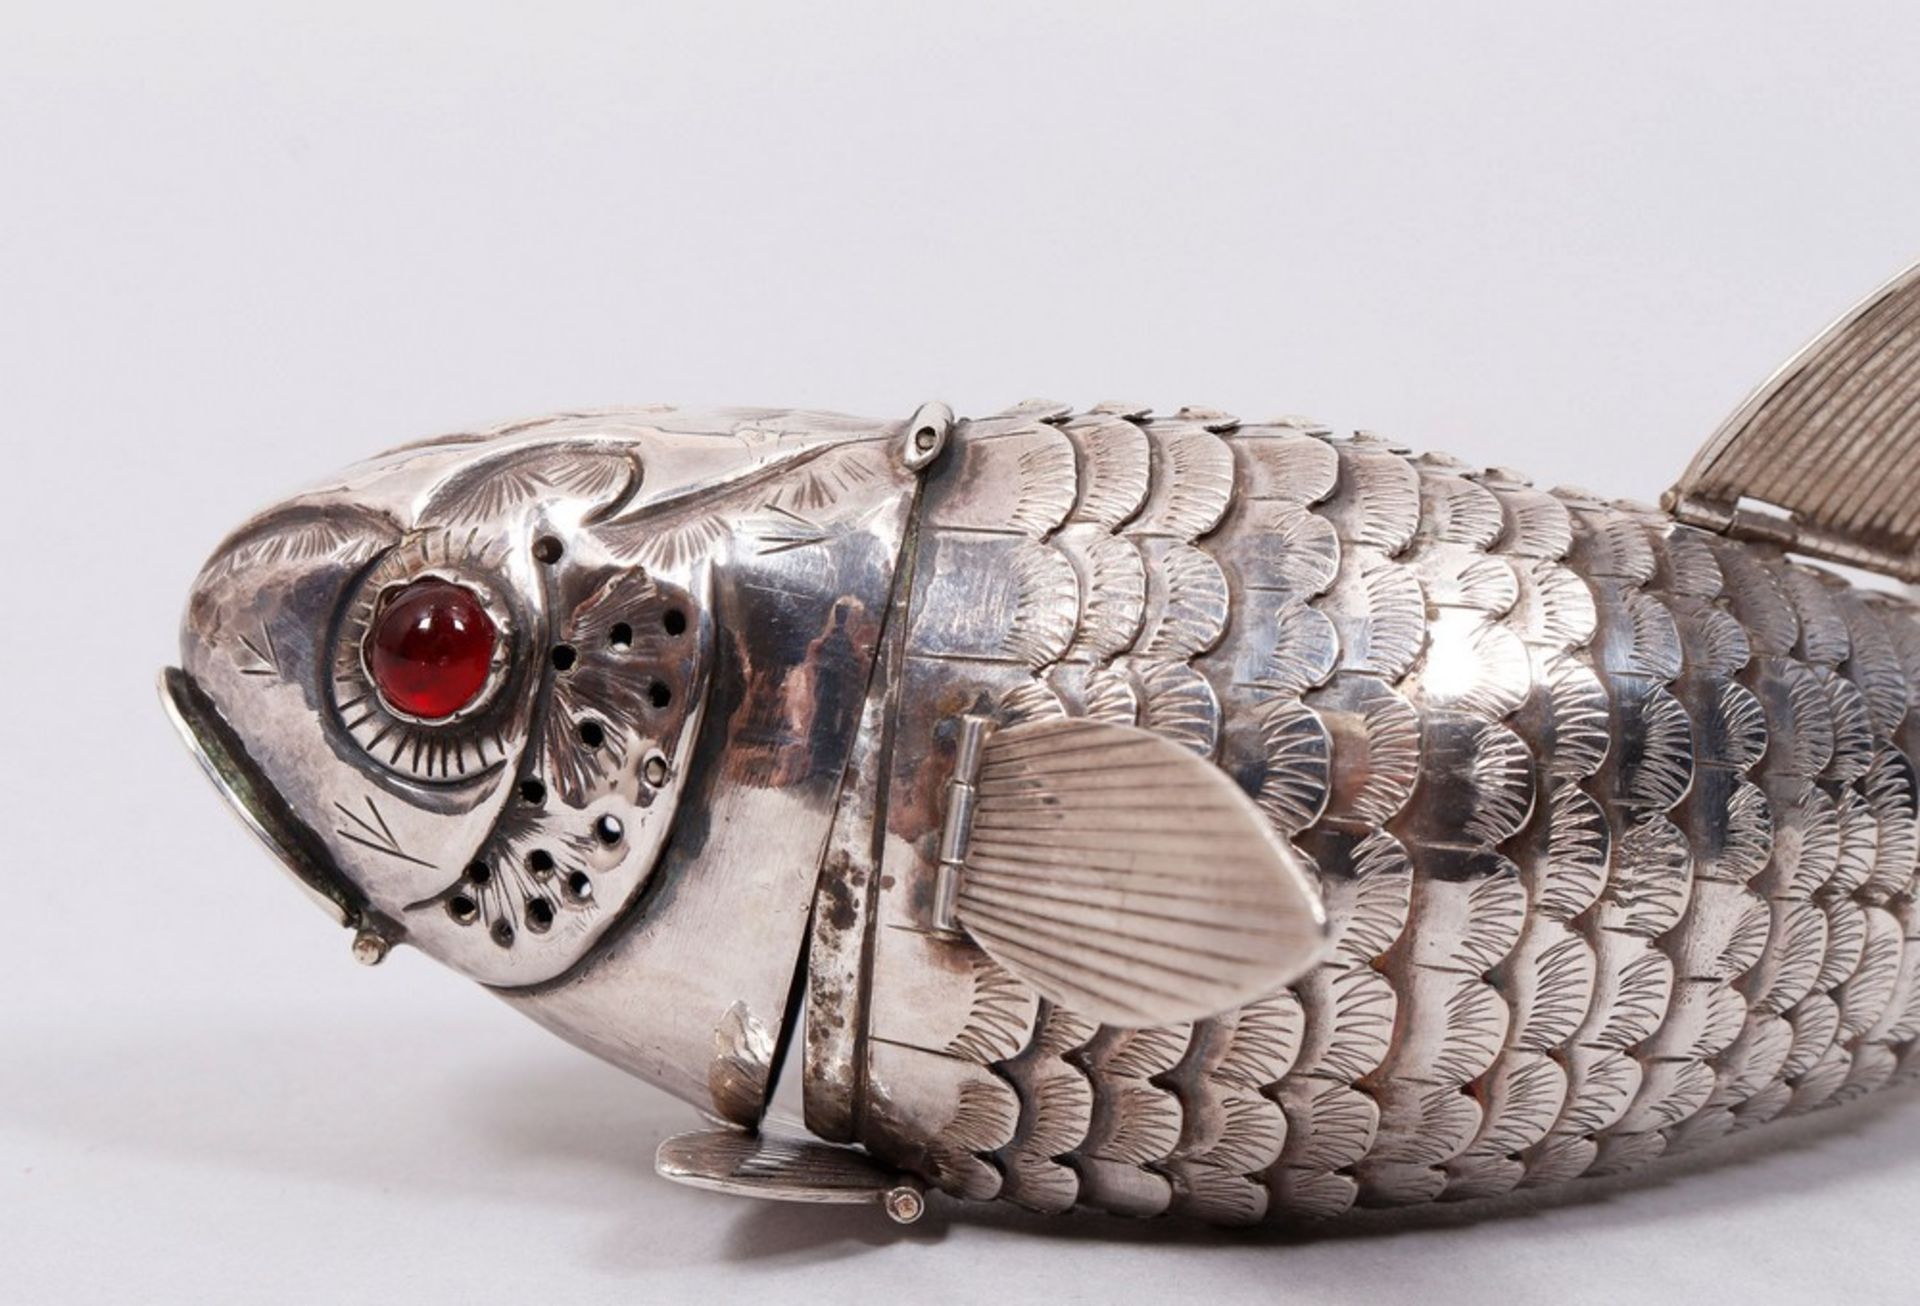 Besamim box in shape of a fish, 830 silver, probably Scandinavia, 19th C. - Image 4 of 7